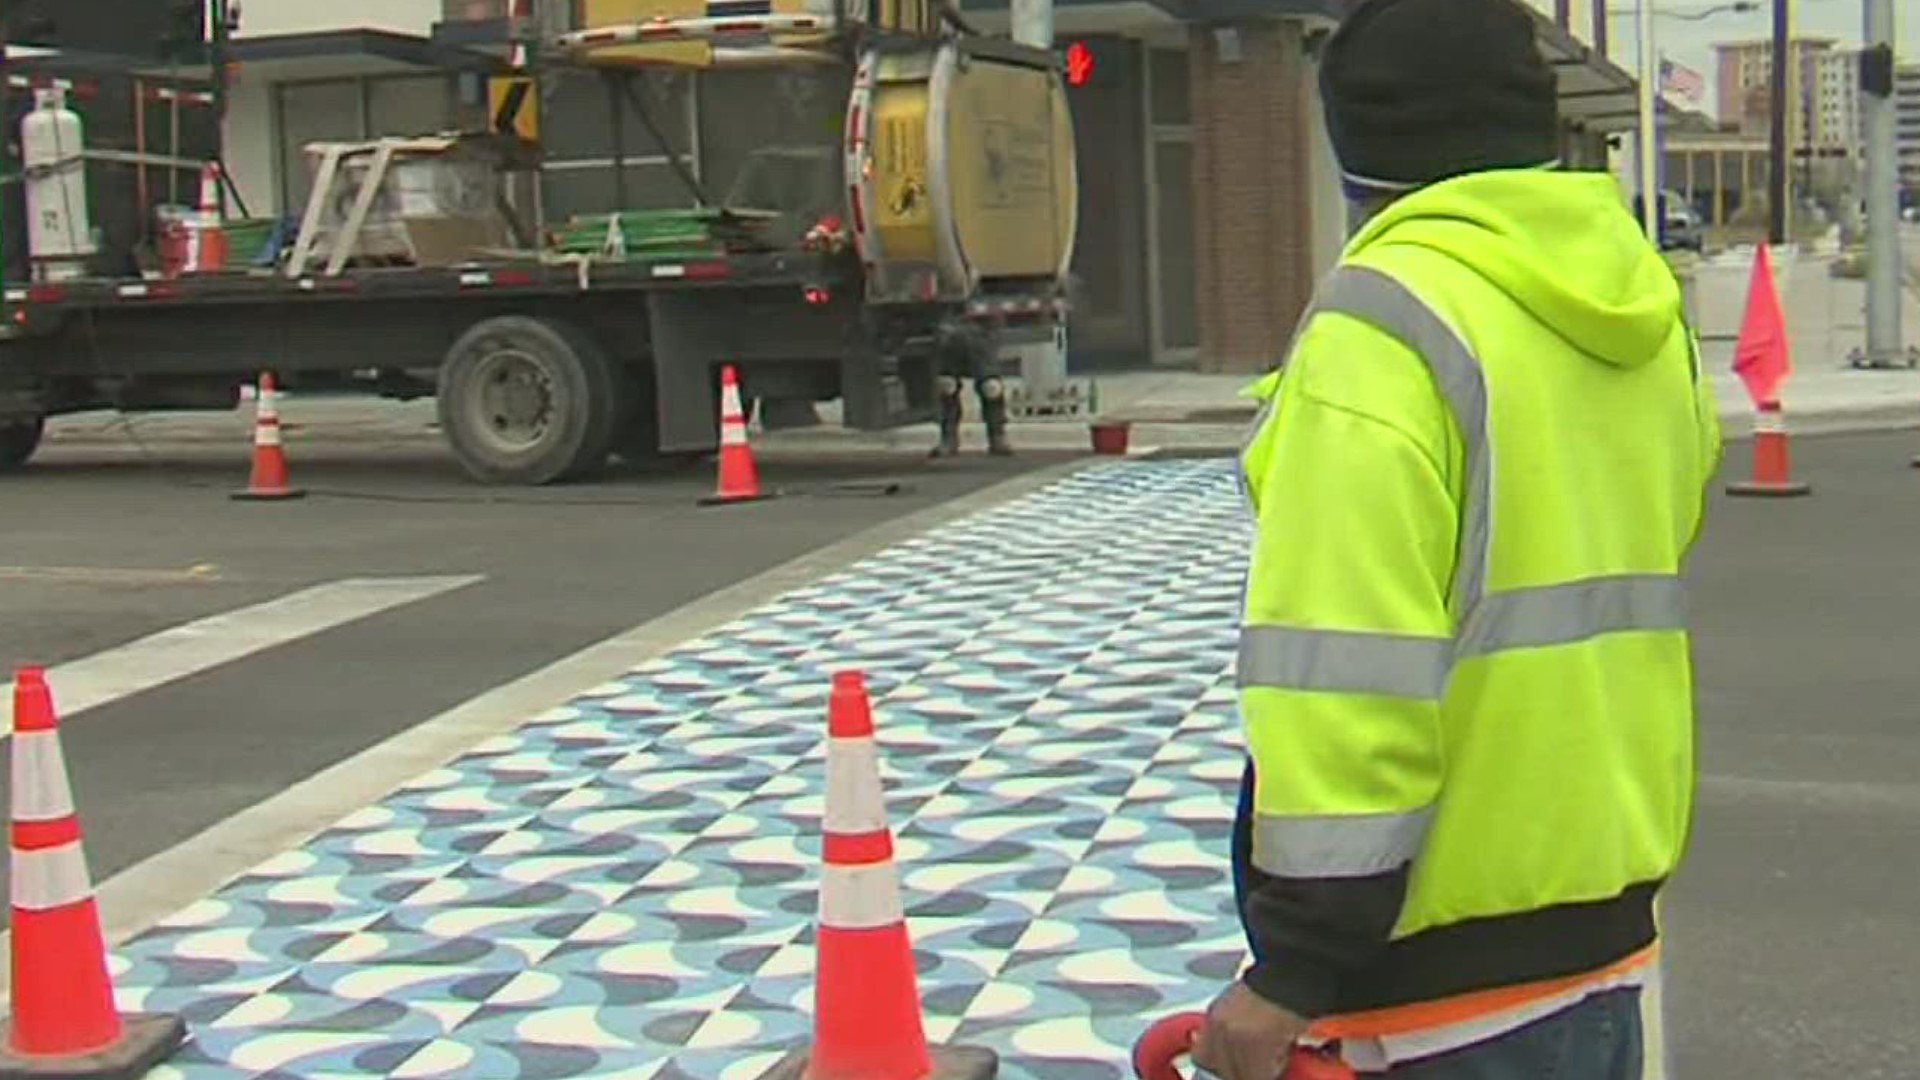 The crosswalk is made out of thermal plastic to prevent the structure from weathering away as quickly.